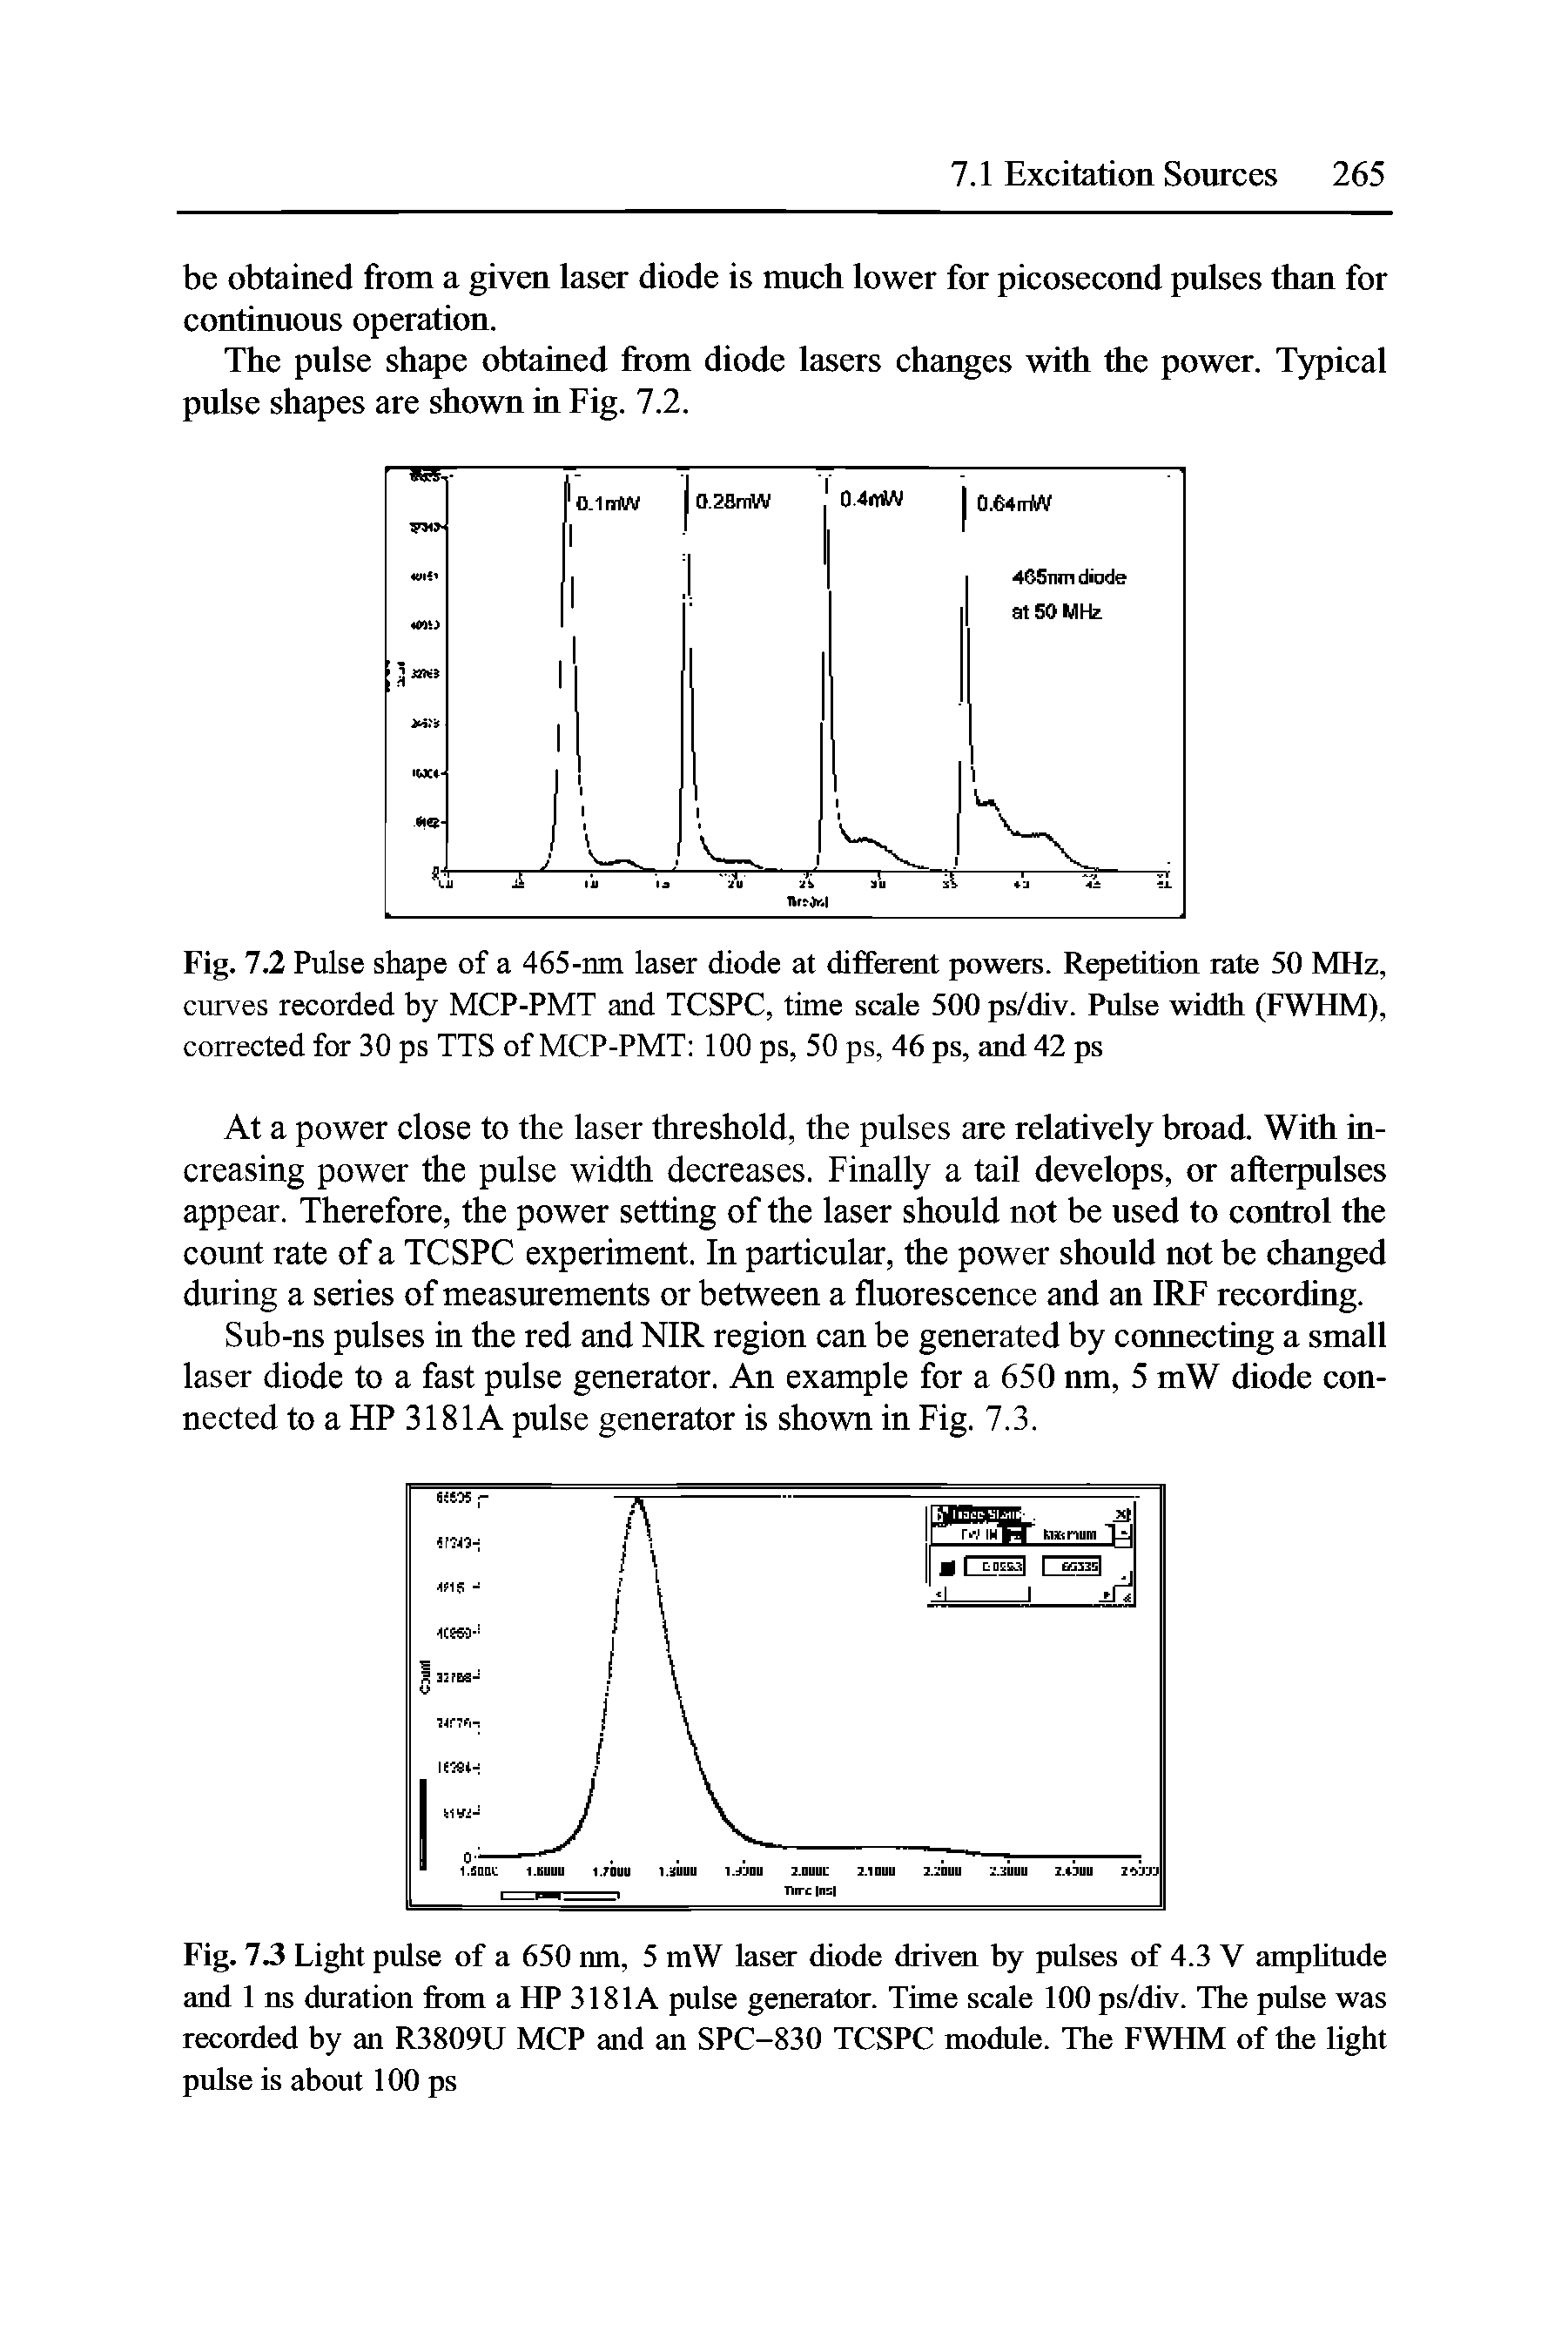 Fig. 7.2 Pulse shape of a 465-nm laser diode at different powers. Repetition rate 50 MHz, curves recorded by MCP-PMT and TCSPC, time scale 500 ps/div. Pulse width (FWHM), corrected for 30 ps TTS of MCP-PMT 100 ps, 50 ps, 46 ps, and 42 ps...